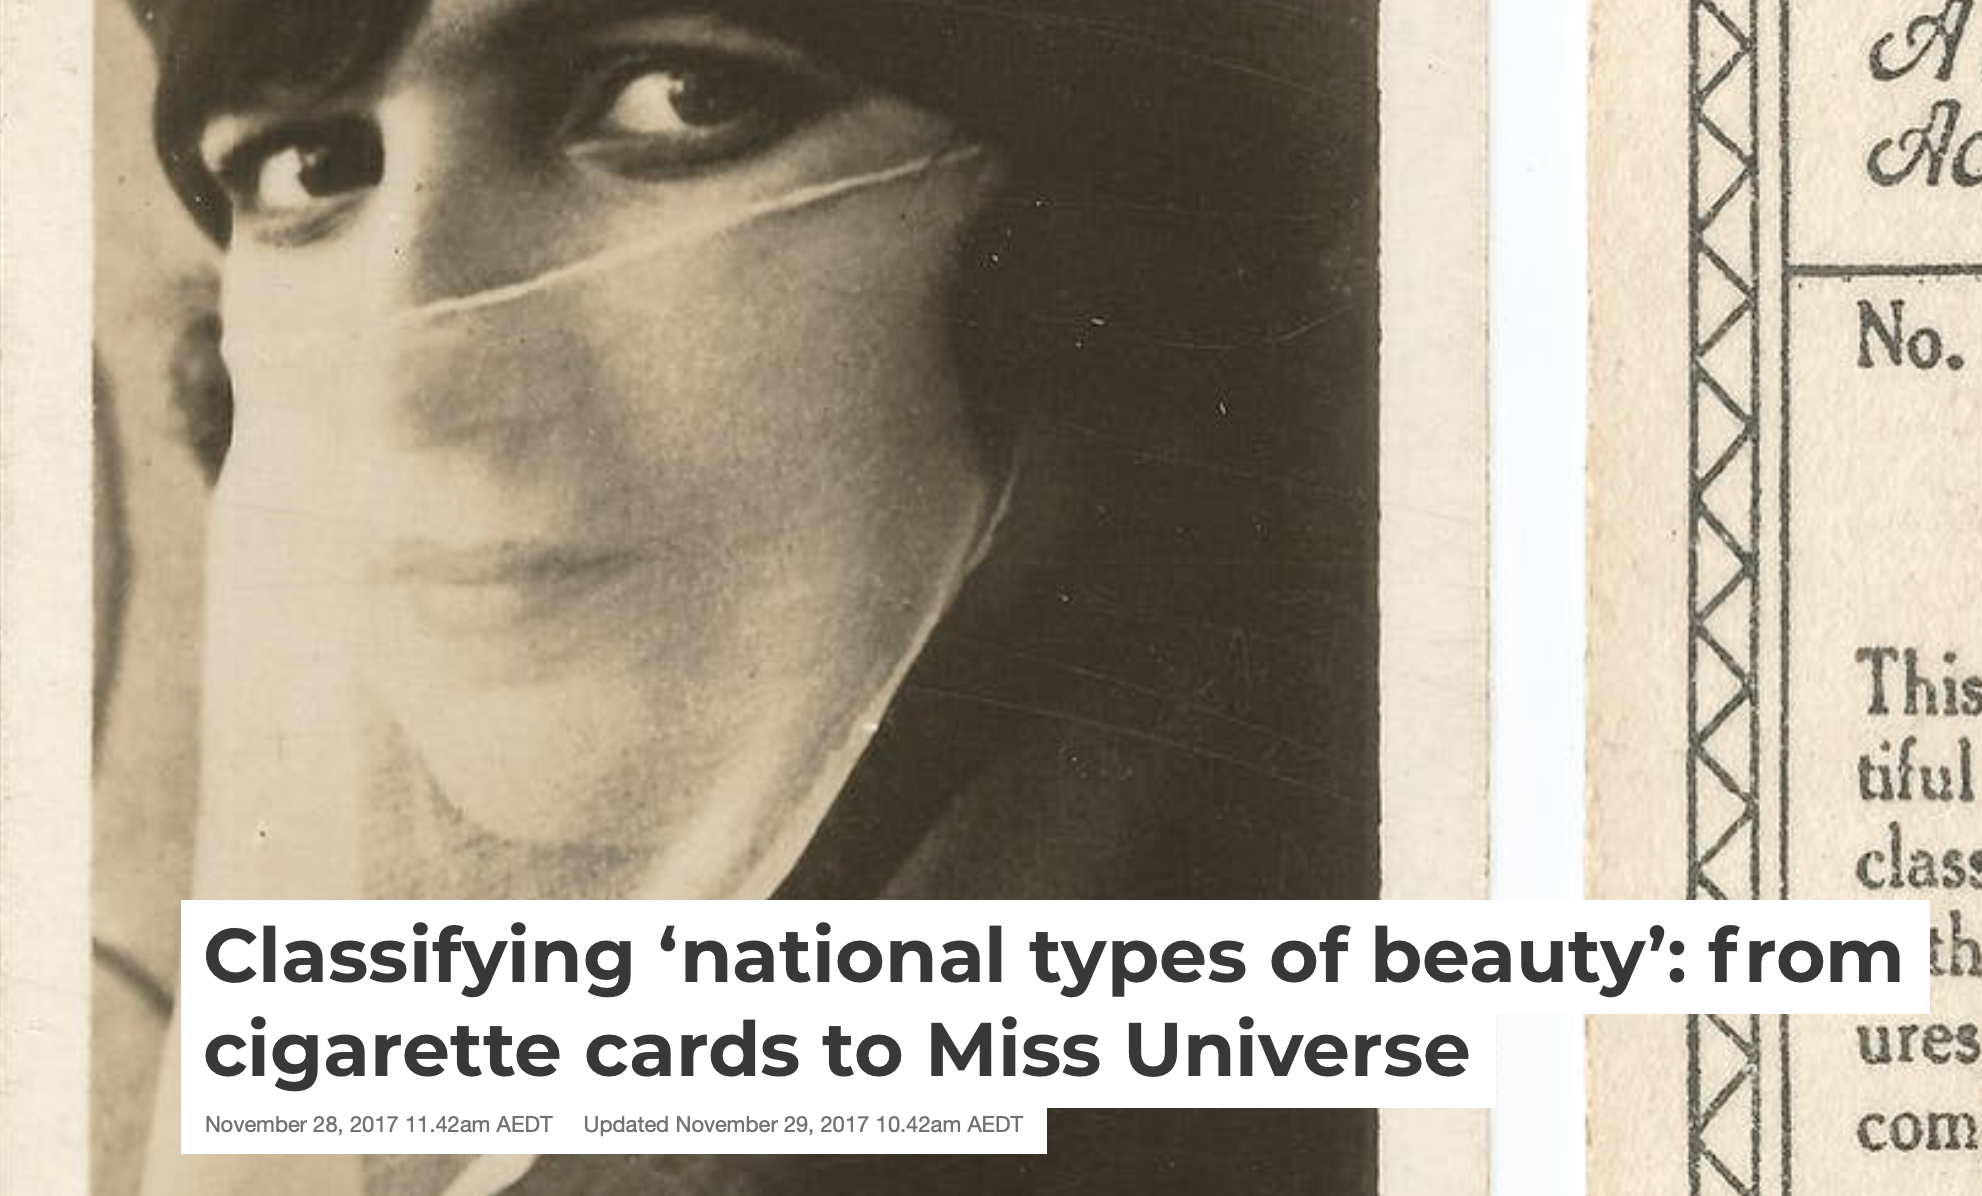 Classifying 'national types of beauty'